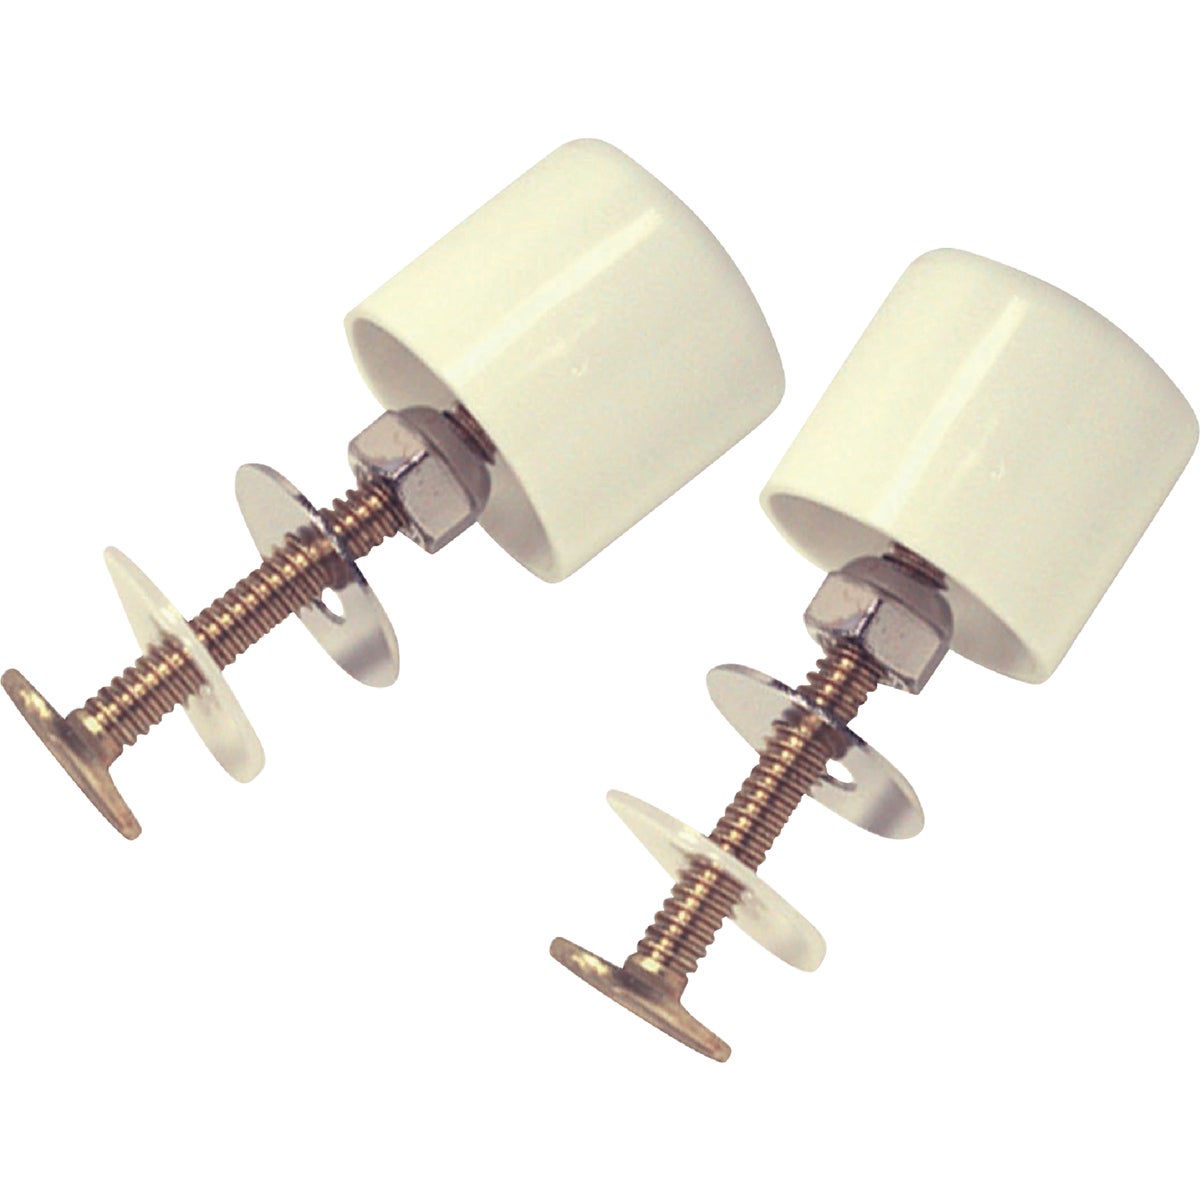 Item 456777, 5/16 In. toilet bolts with screw-on caps.<br>
<br><b>No. 88884:</b> Size: 5/16 In.